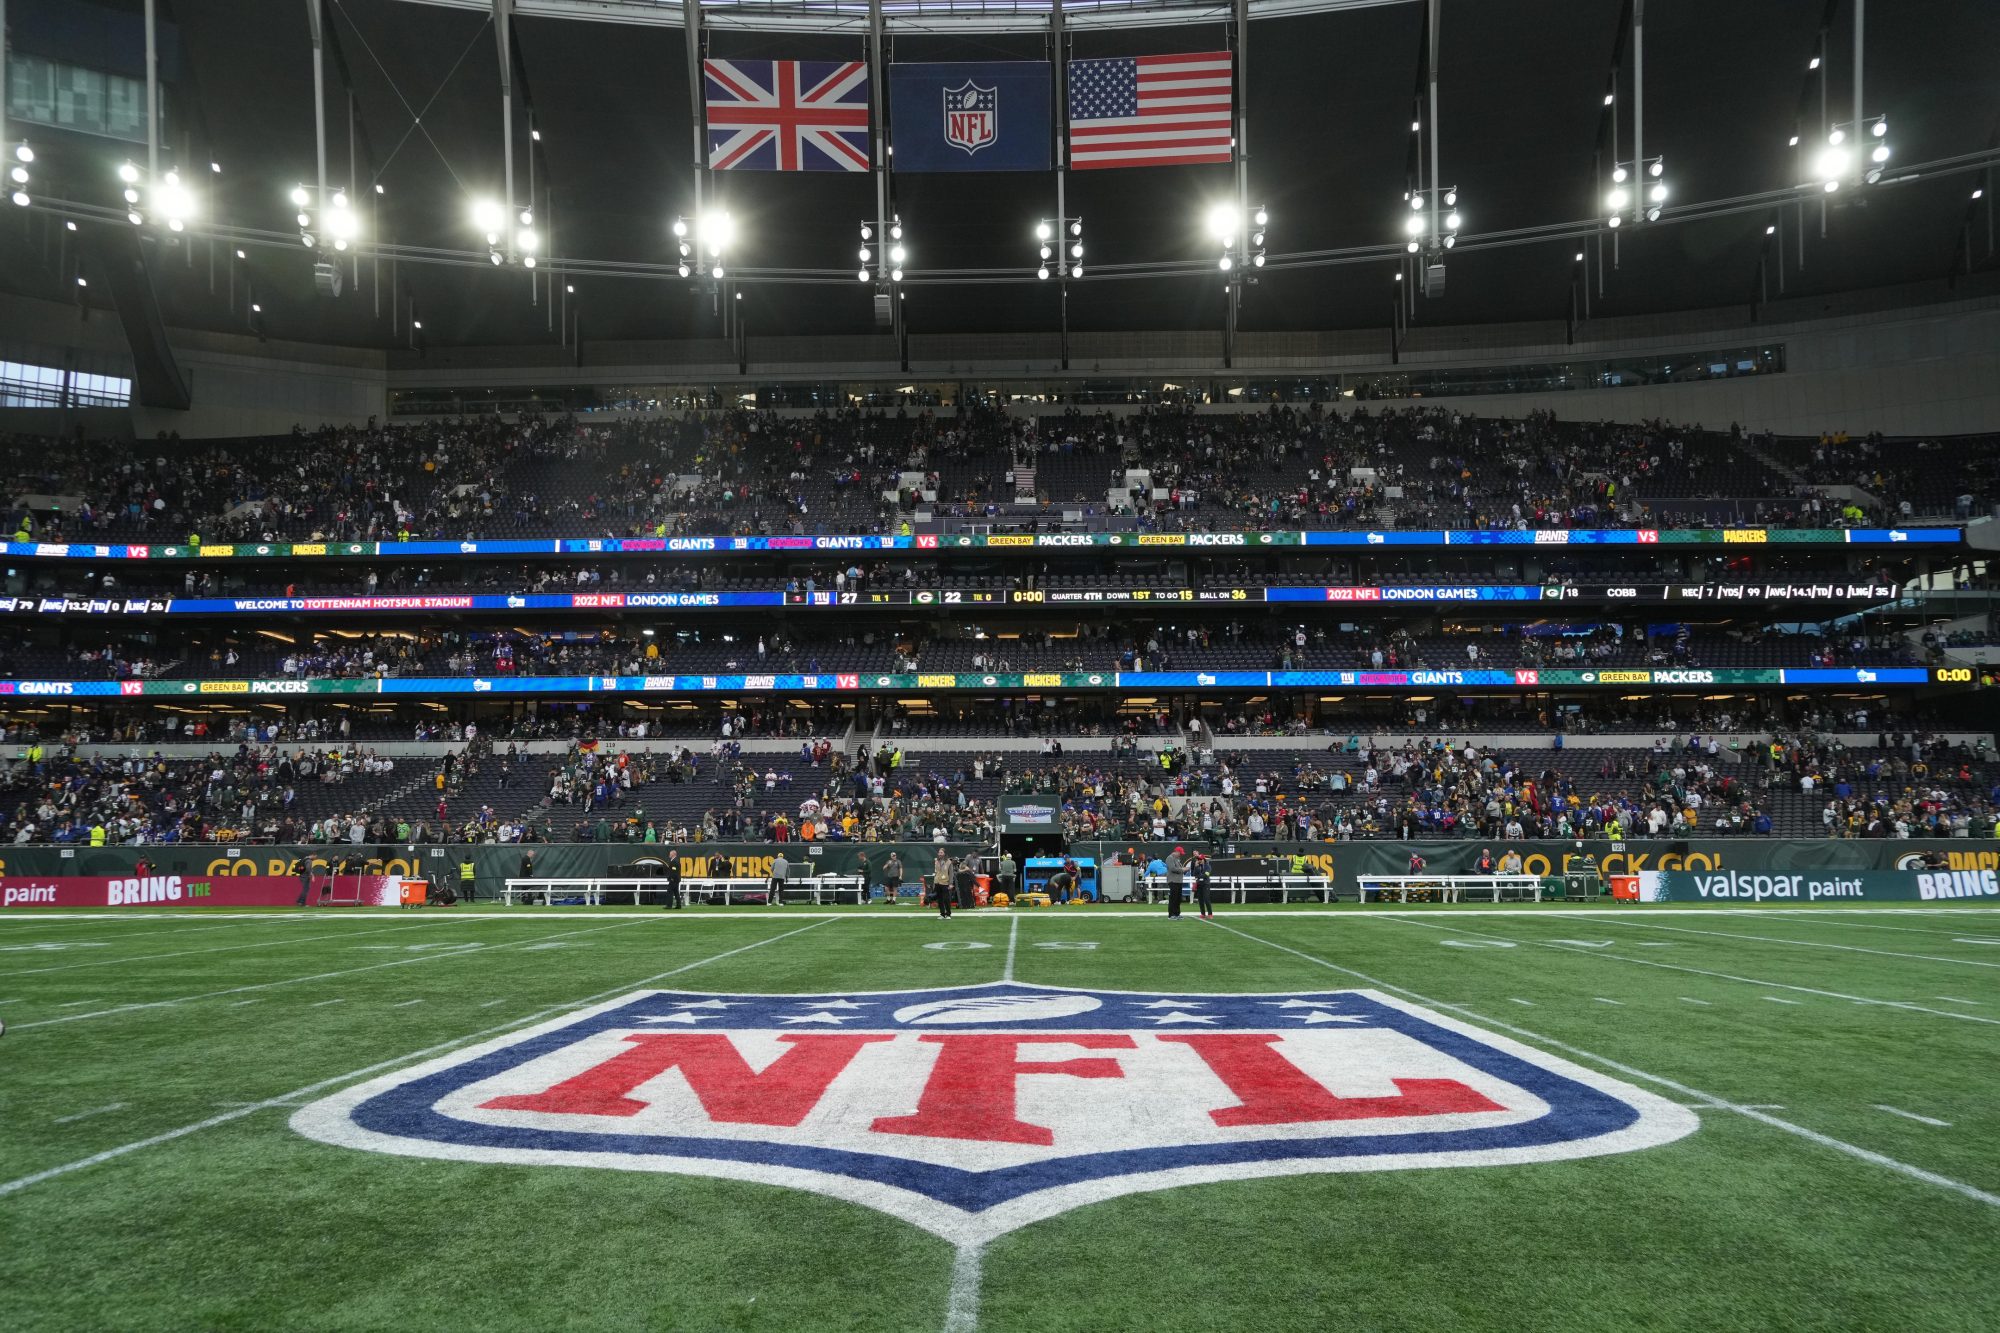 2022 NFL International Series Games: What will the matchups be?